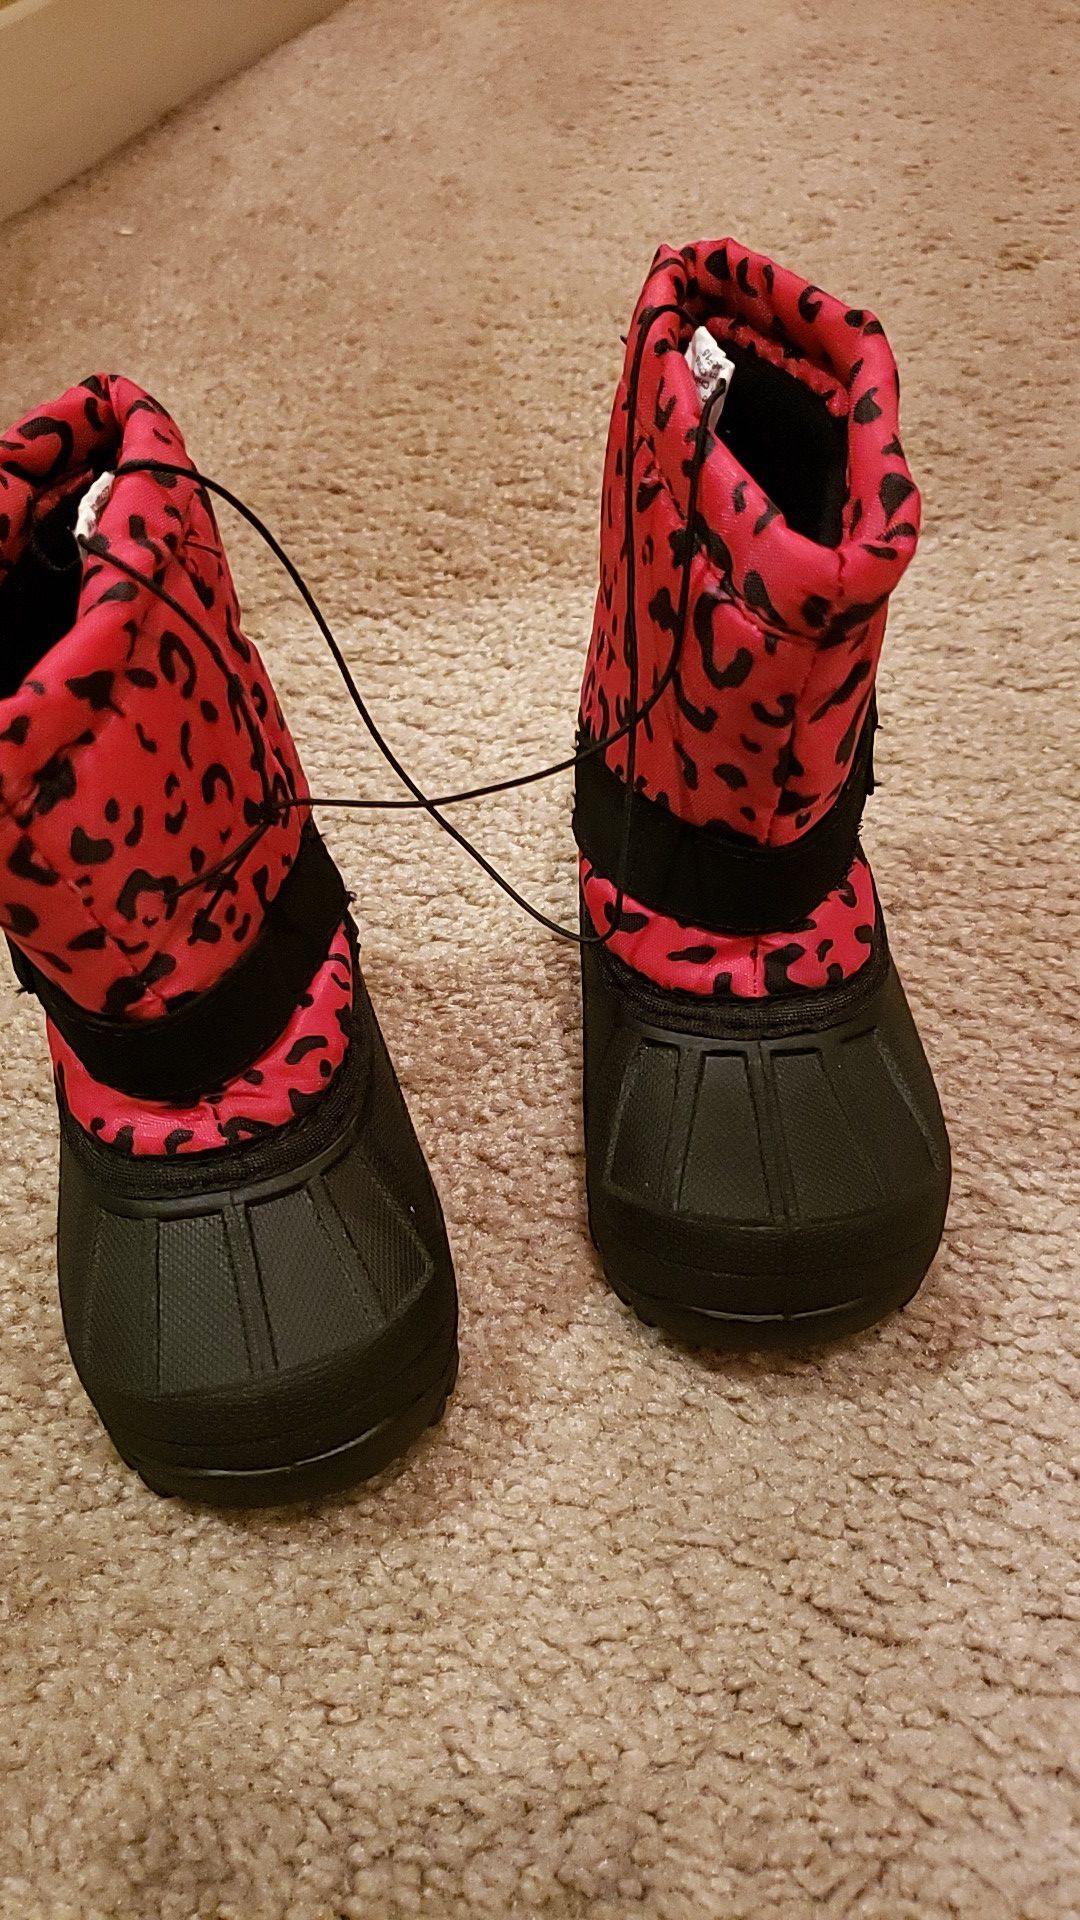 Toddler girls snow/winter boots size 6